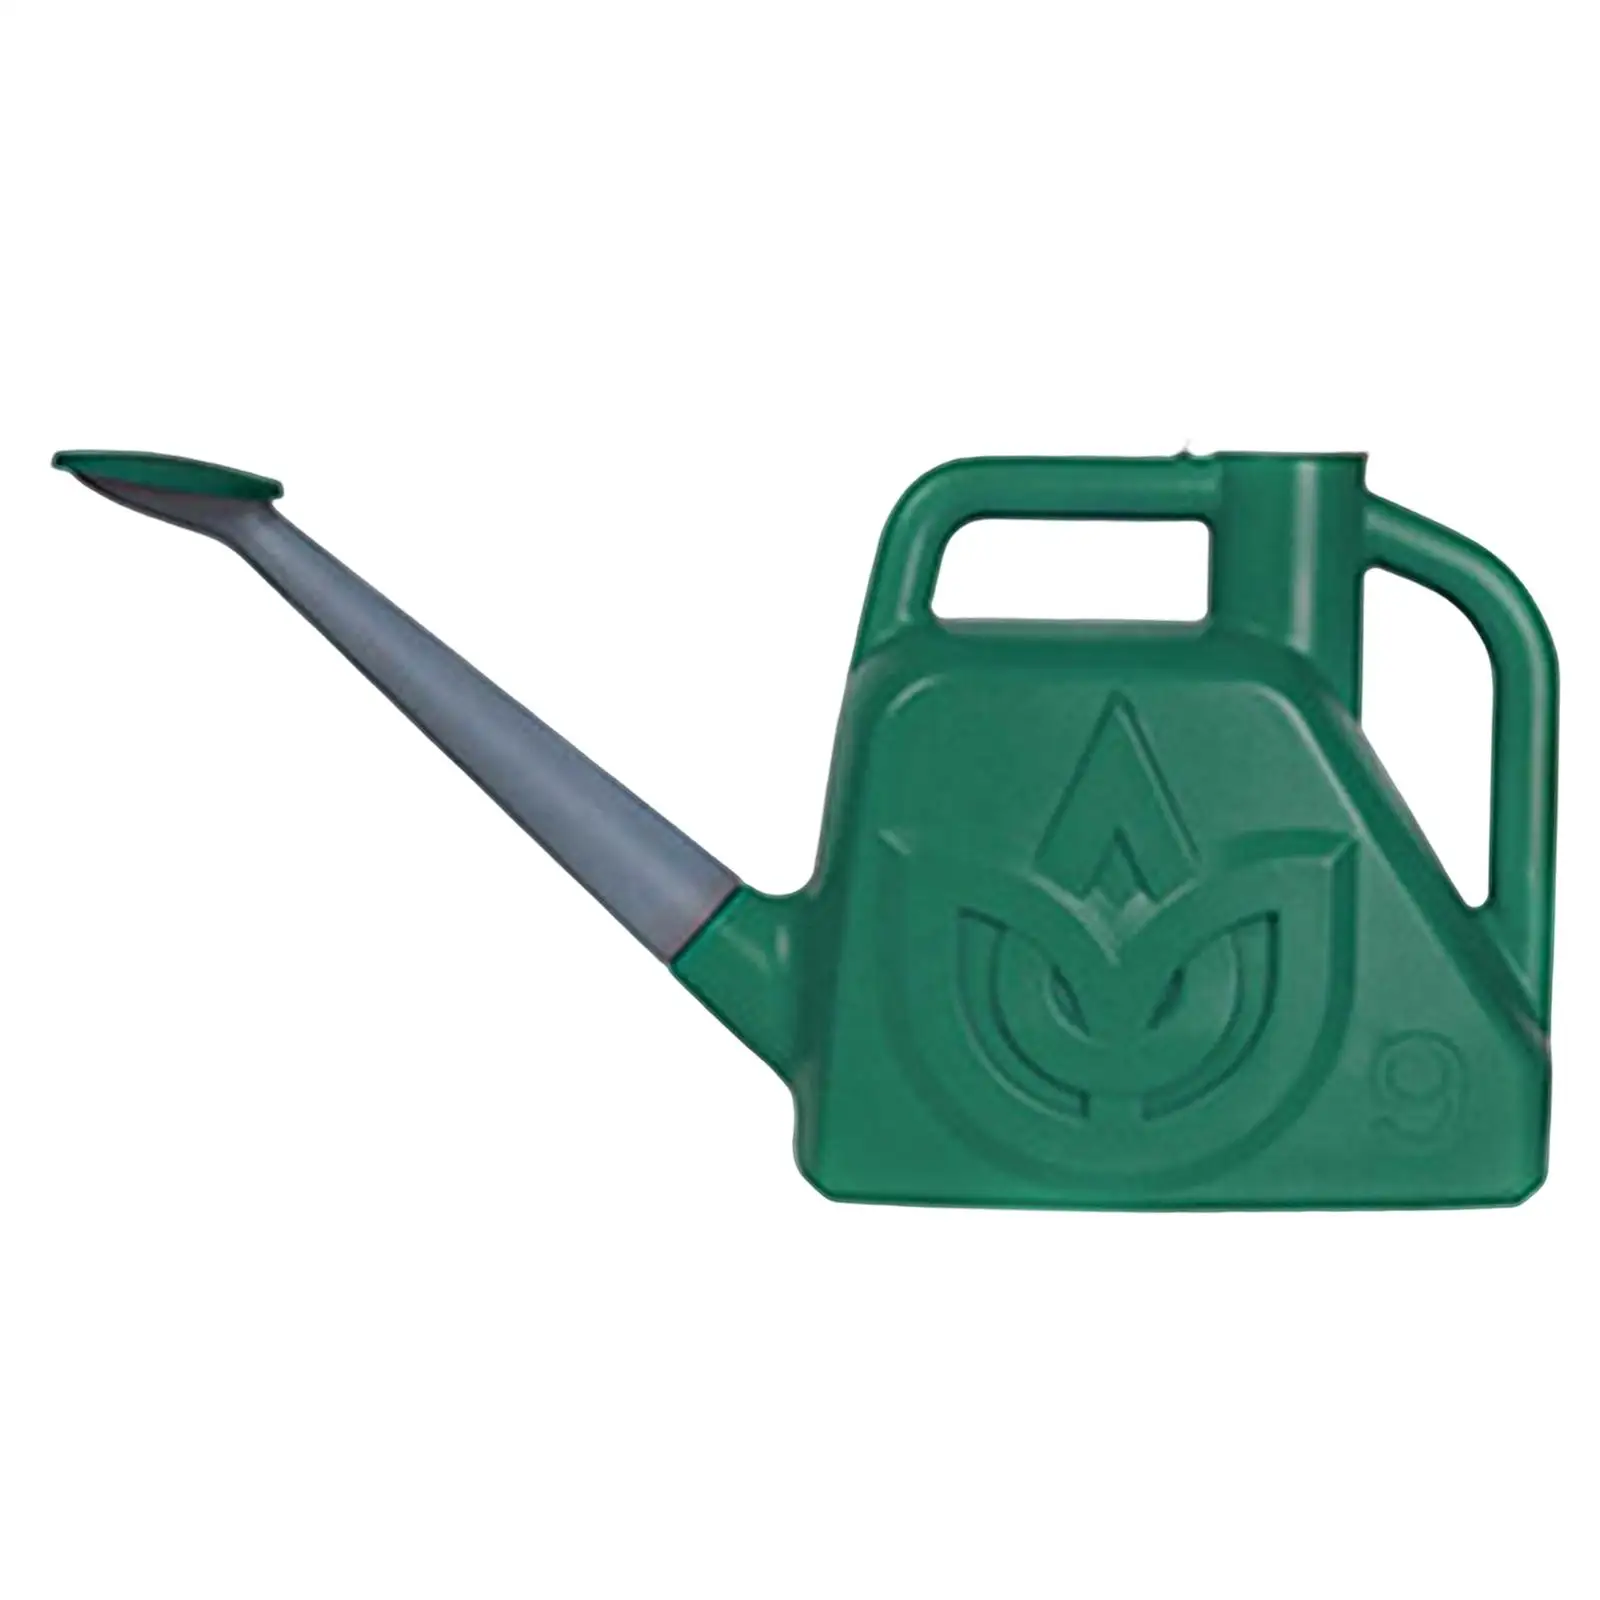 Large Capacity Watering Can with Sprinkler Head for Garden Flower